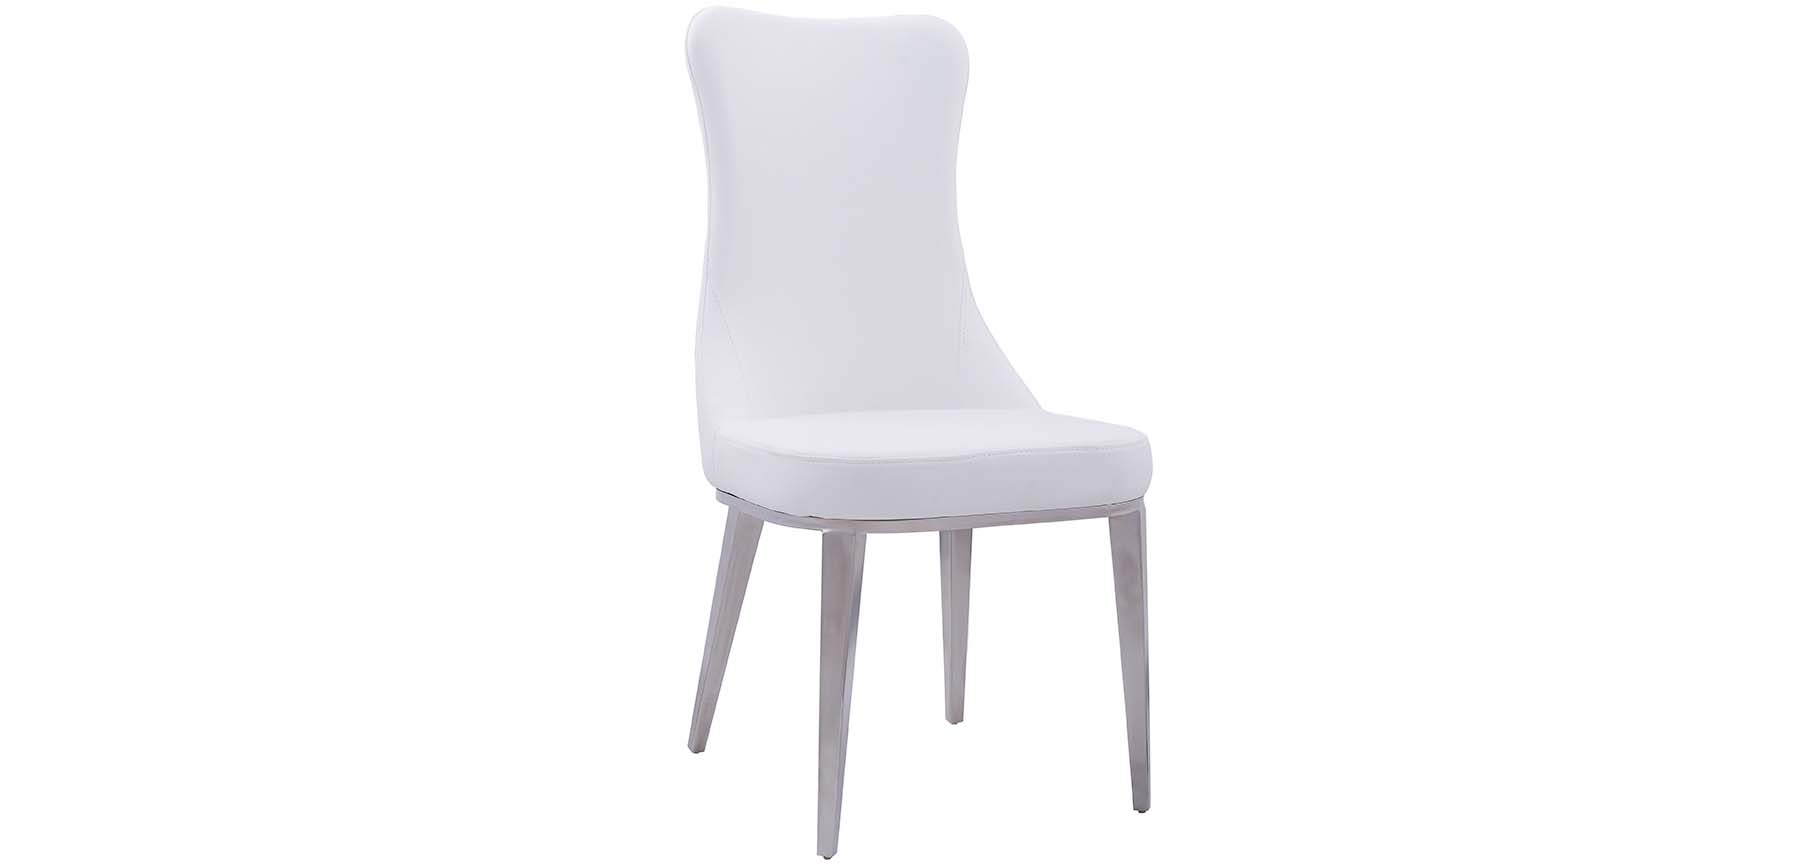 Brands Motif, Spain 6138 Solid White (no pattern) Chair